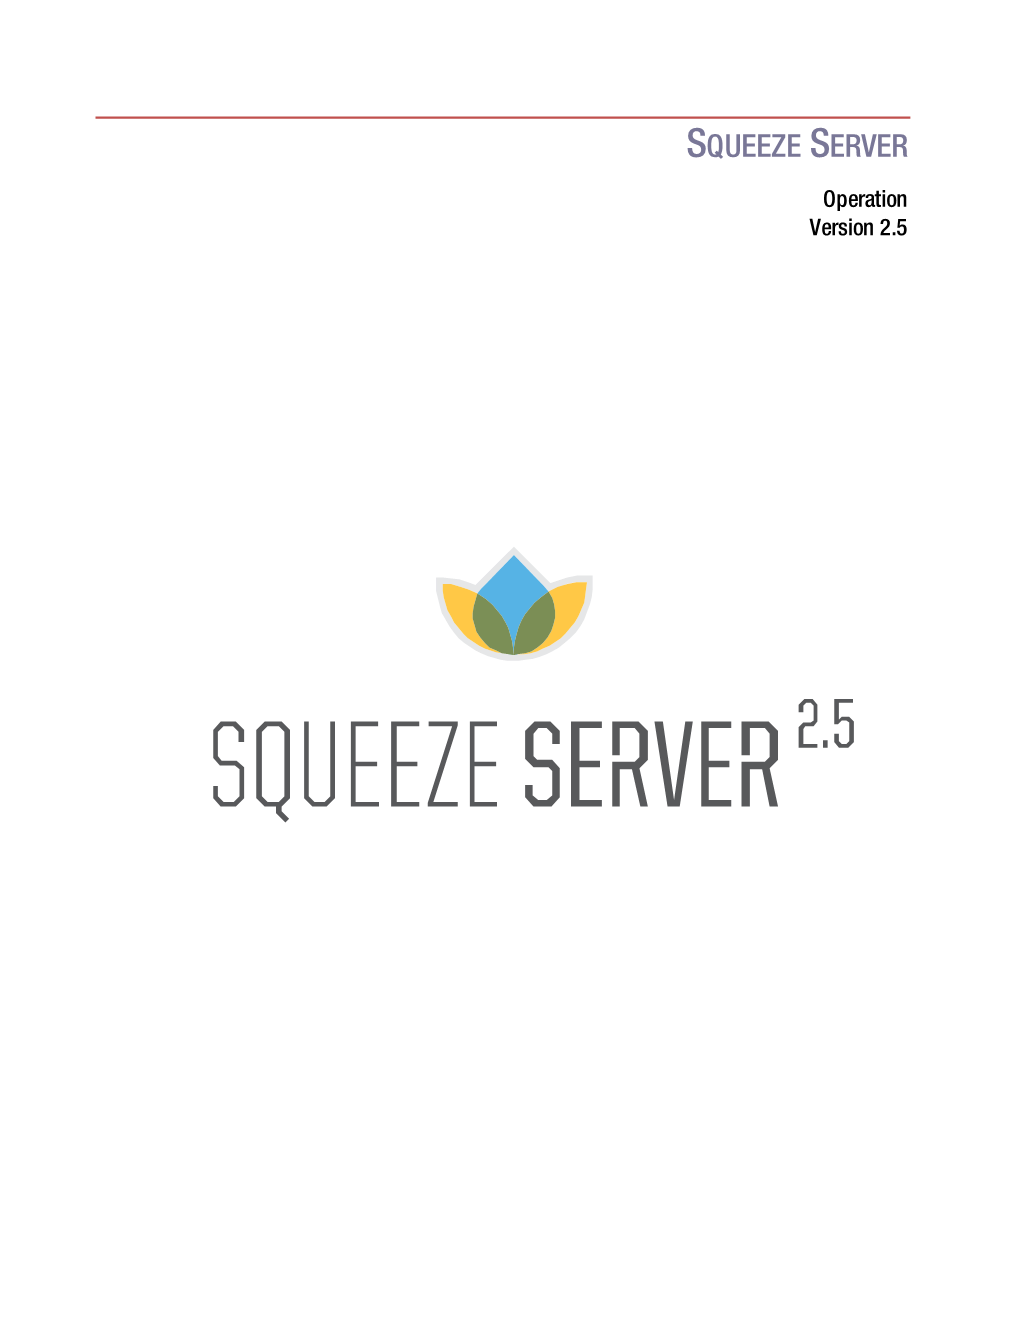 SQUEEZE SERVER Operation Version 2.5